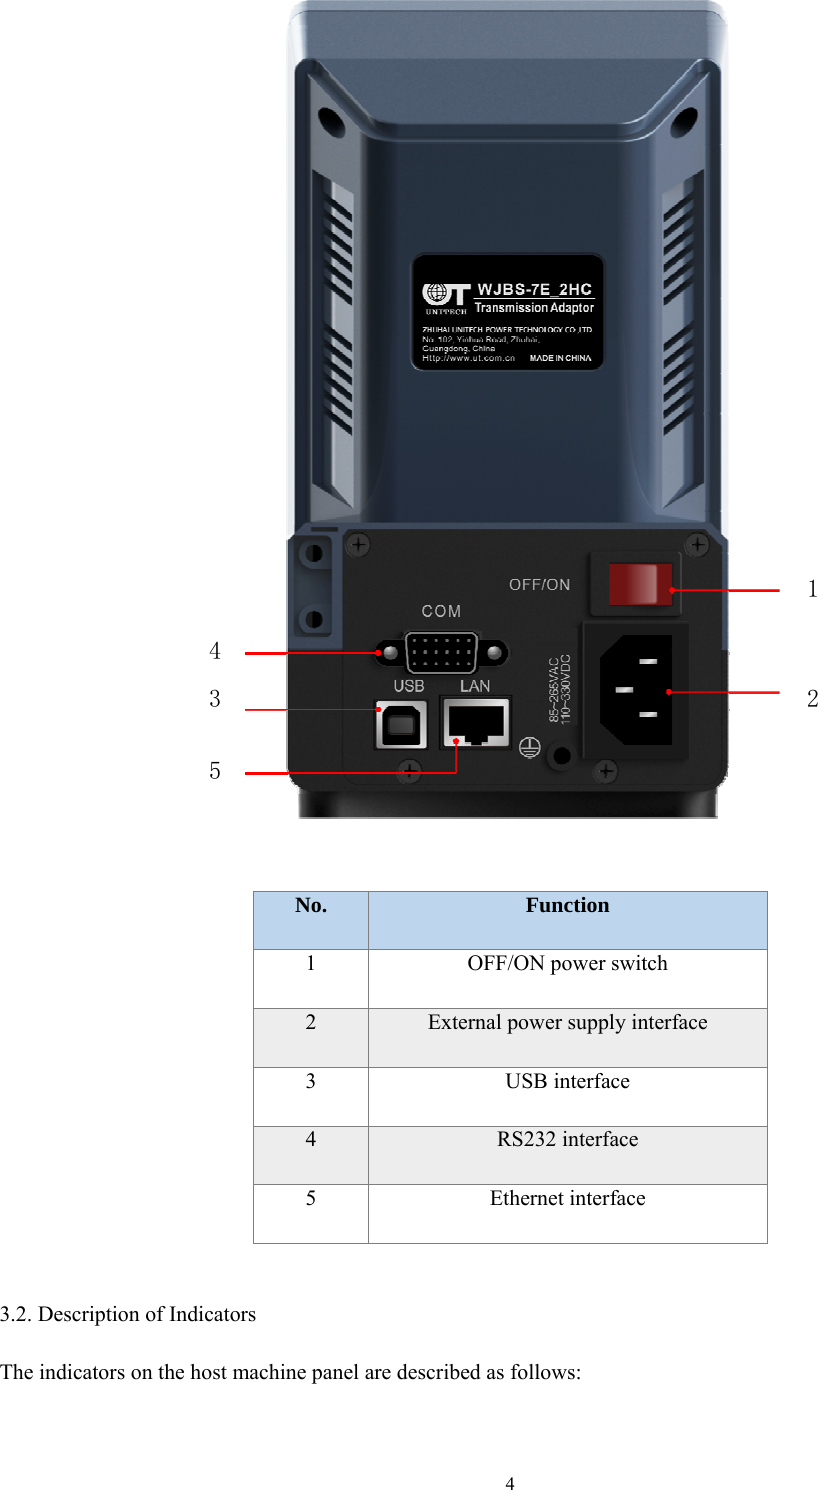 4  No.  Function 1  OFF/ON power switch 2  External power supply interface 3 USB interface 4  RS232 interface 5 Ethernet interface  3.2. Description of Indicators The indicators on the host machine panel are described as follows: 1 2 5 3 4 